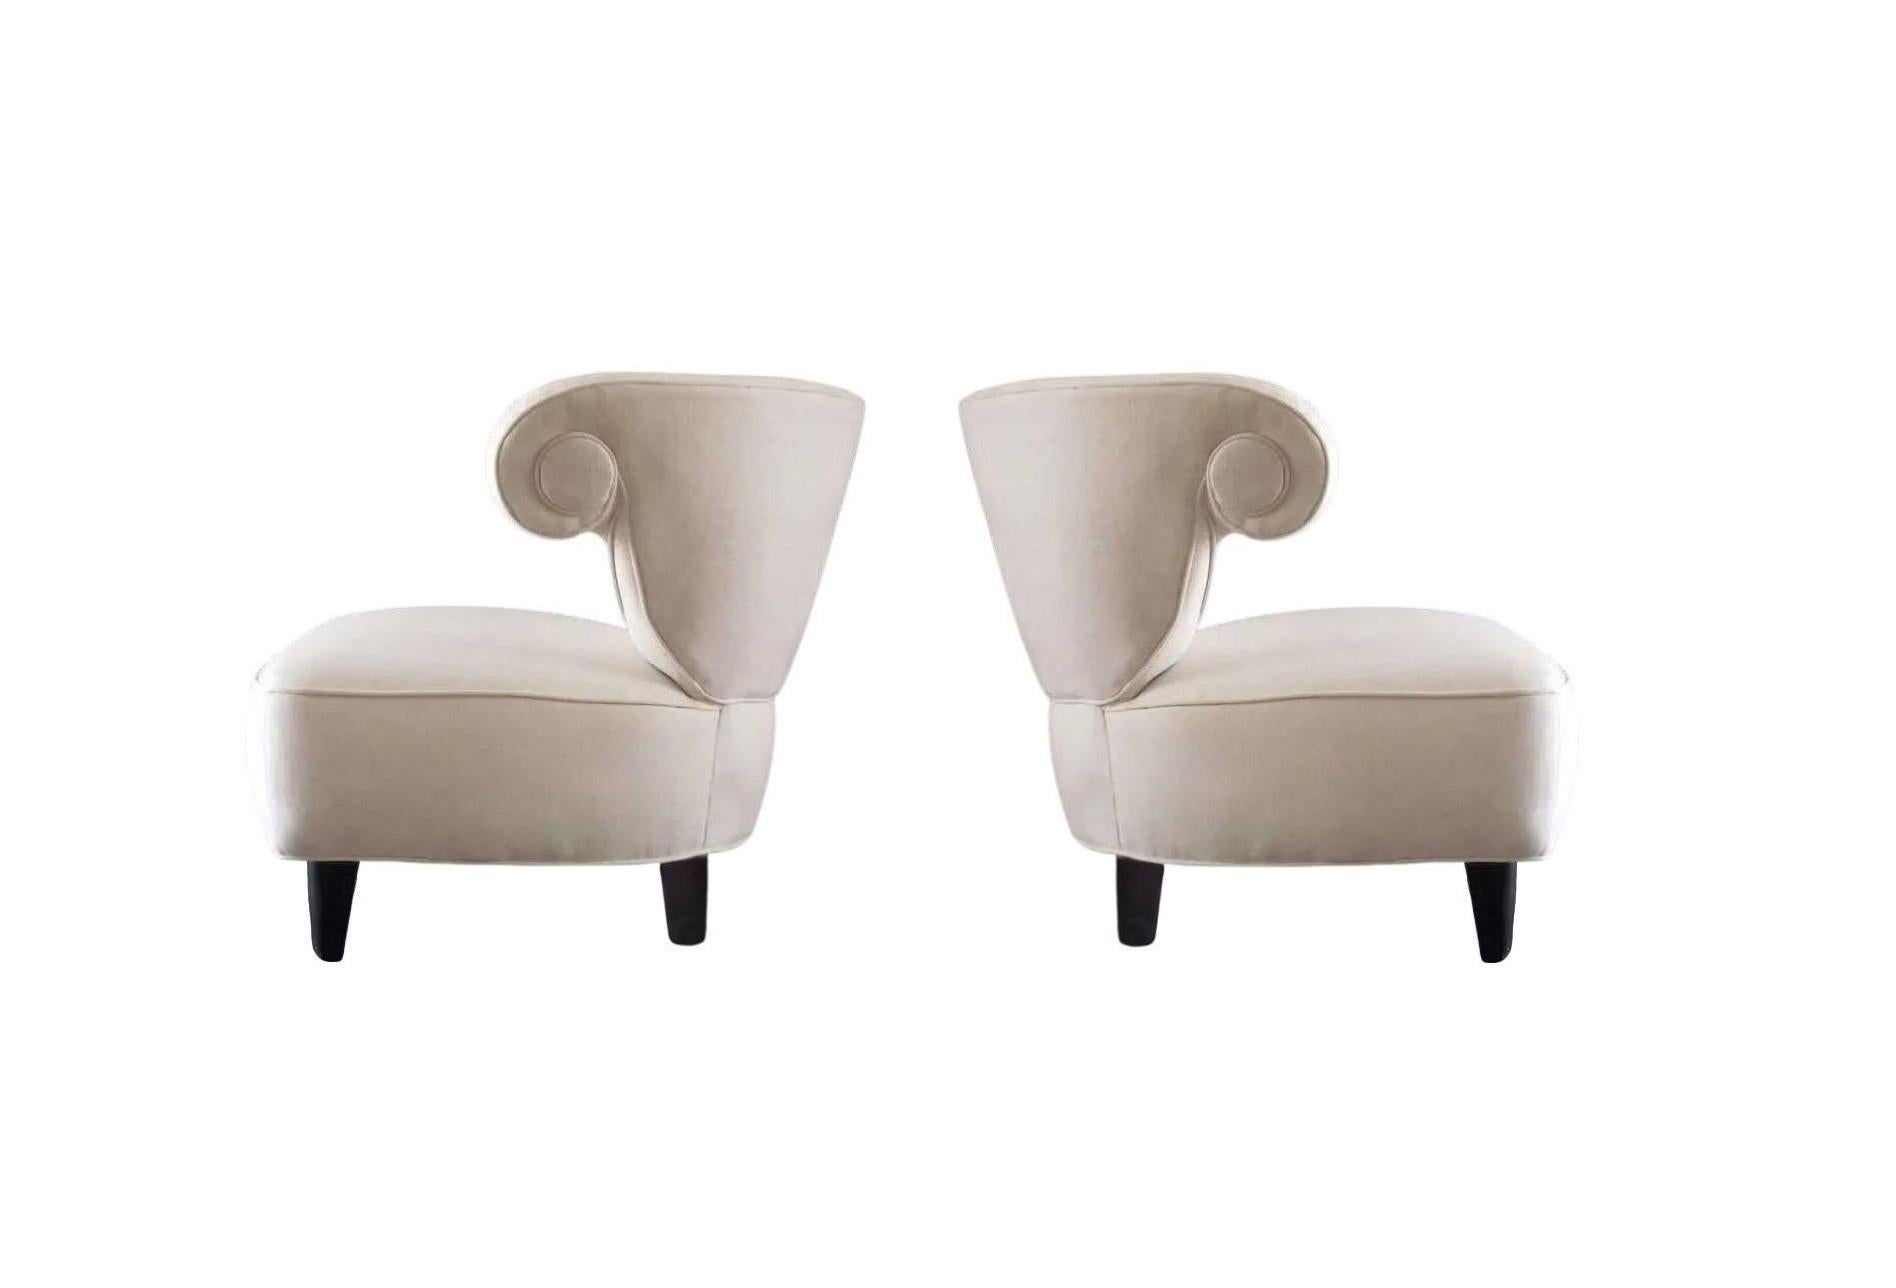 American Pair of Scrolled-Arm Chairs by Paul László, 1940s For Sale